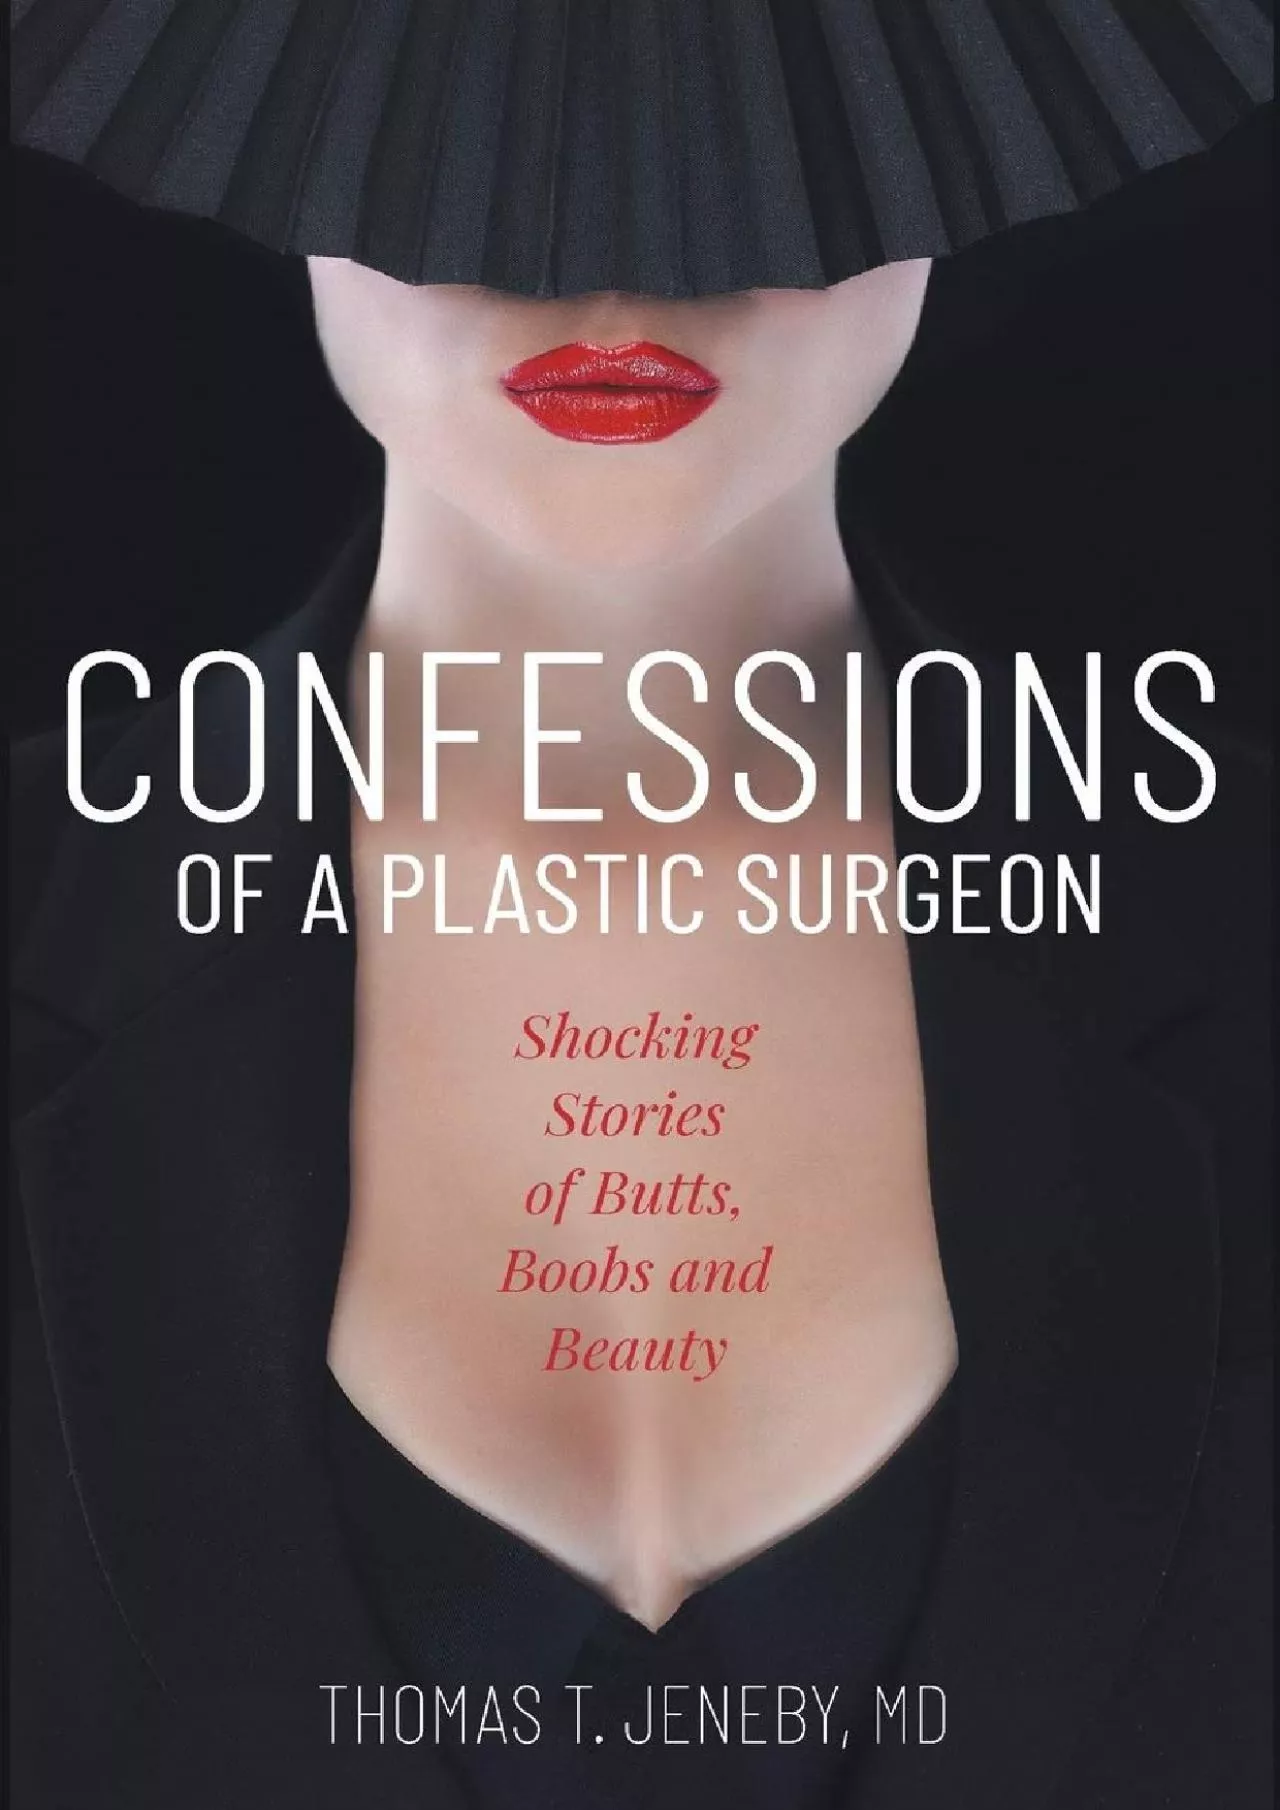 (EBOOK)-Confessions of a Plastic Surgeon: Shocking Stories about Enhancing Butts, Boobs,